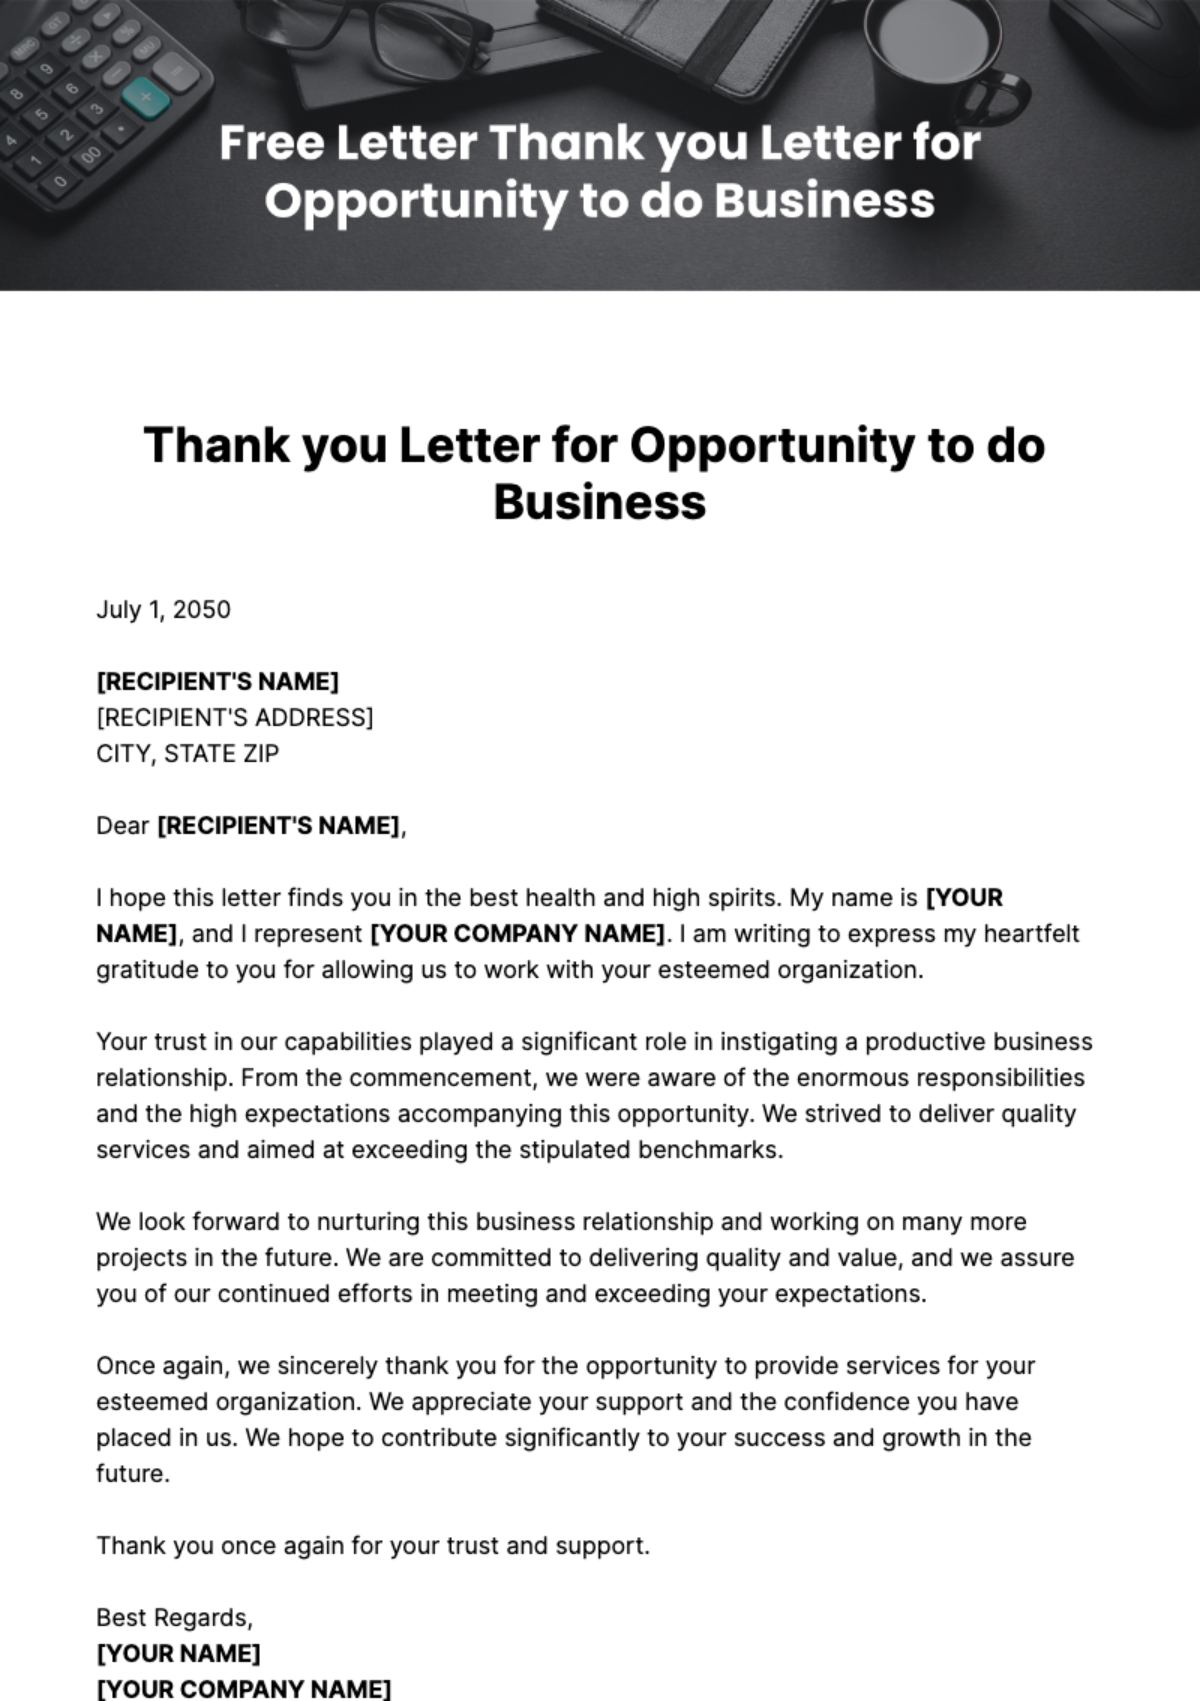 Free Thank you Letter for Opportunity to do Business Template